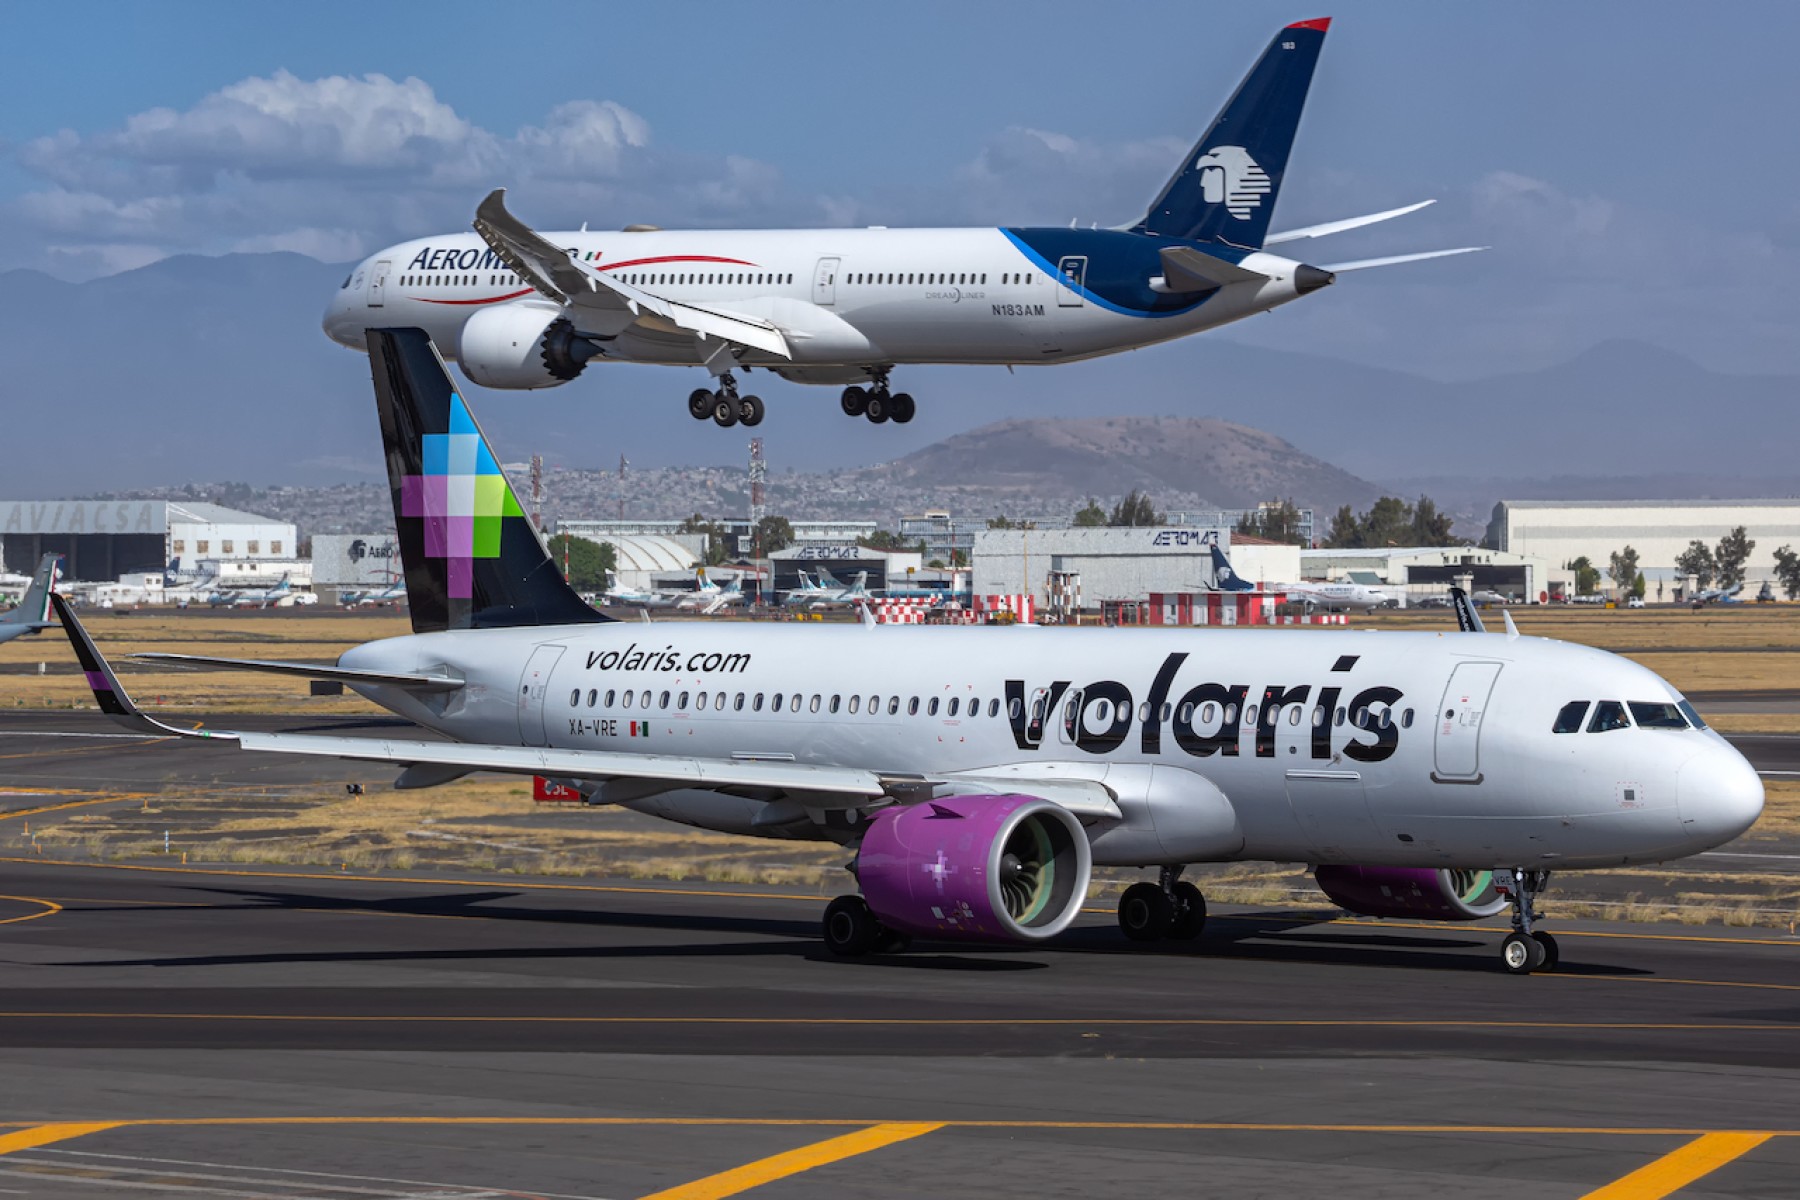 Half of Mexico's air fleet now operated by low-cost airlines